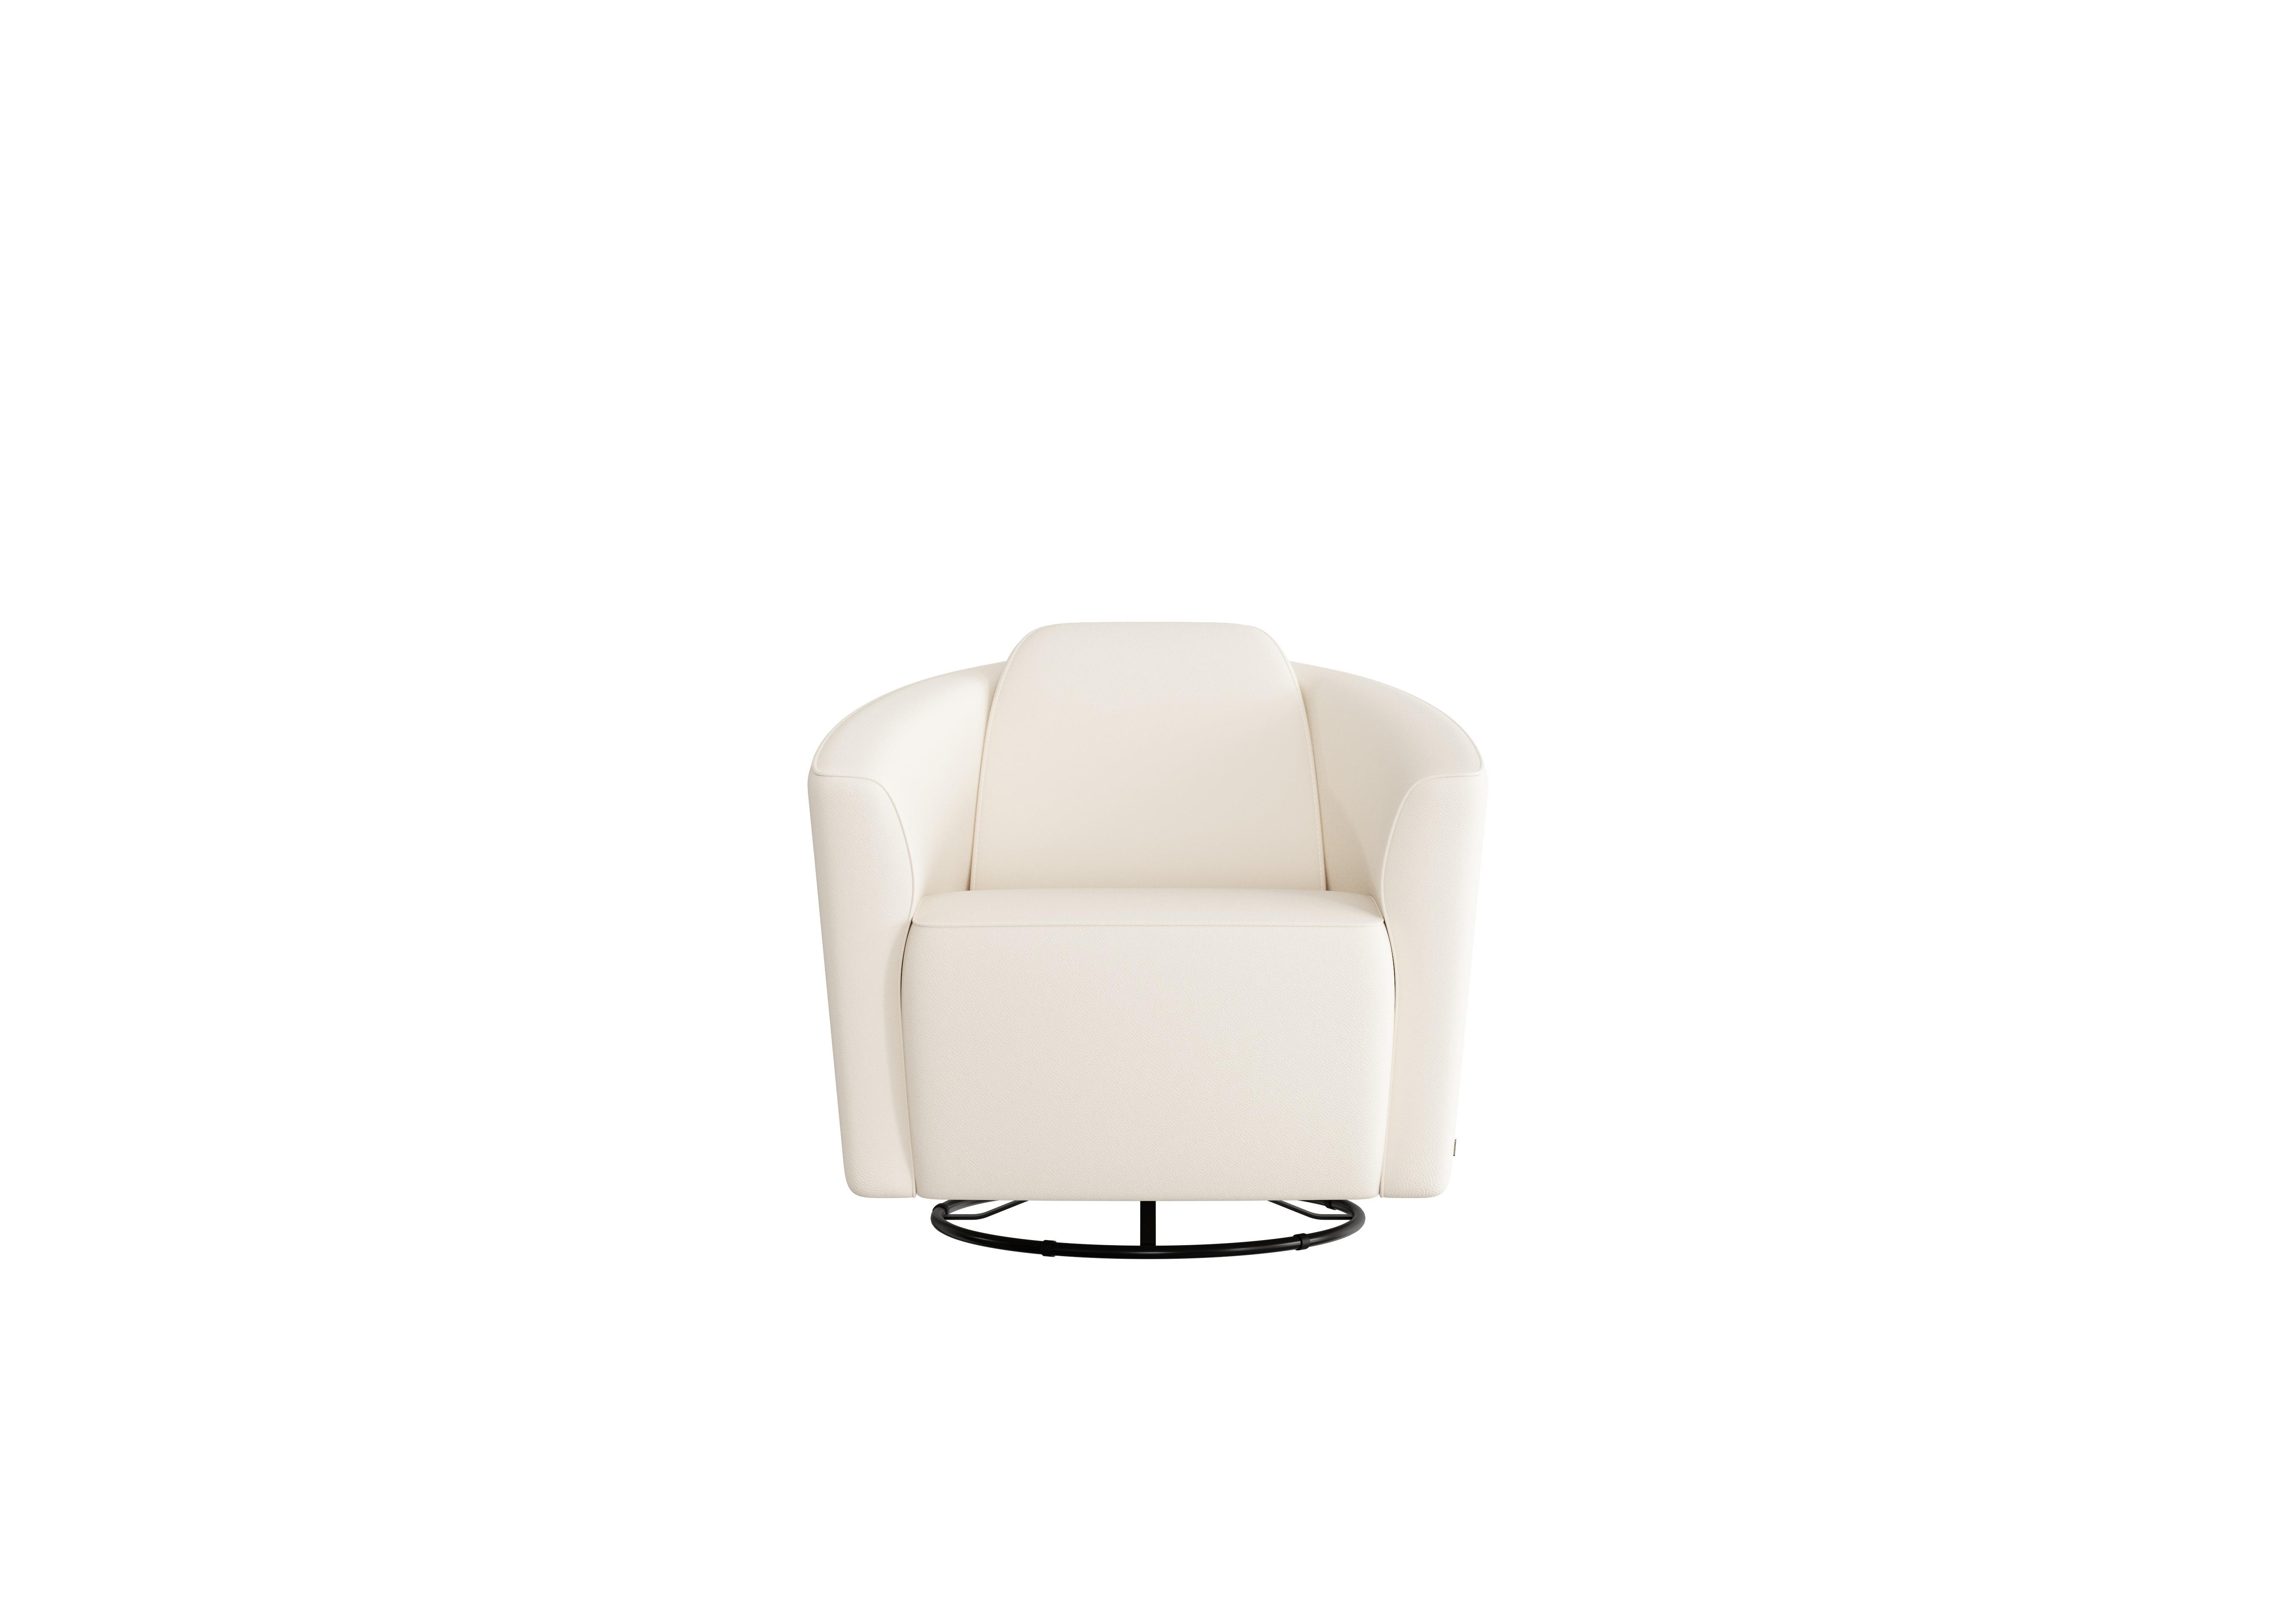 Ketty Leather Swivel Chair in Torello Bianco 93 on Furniture Village